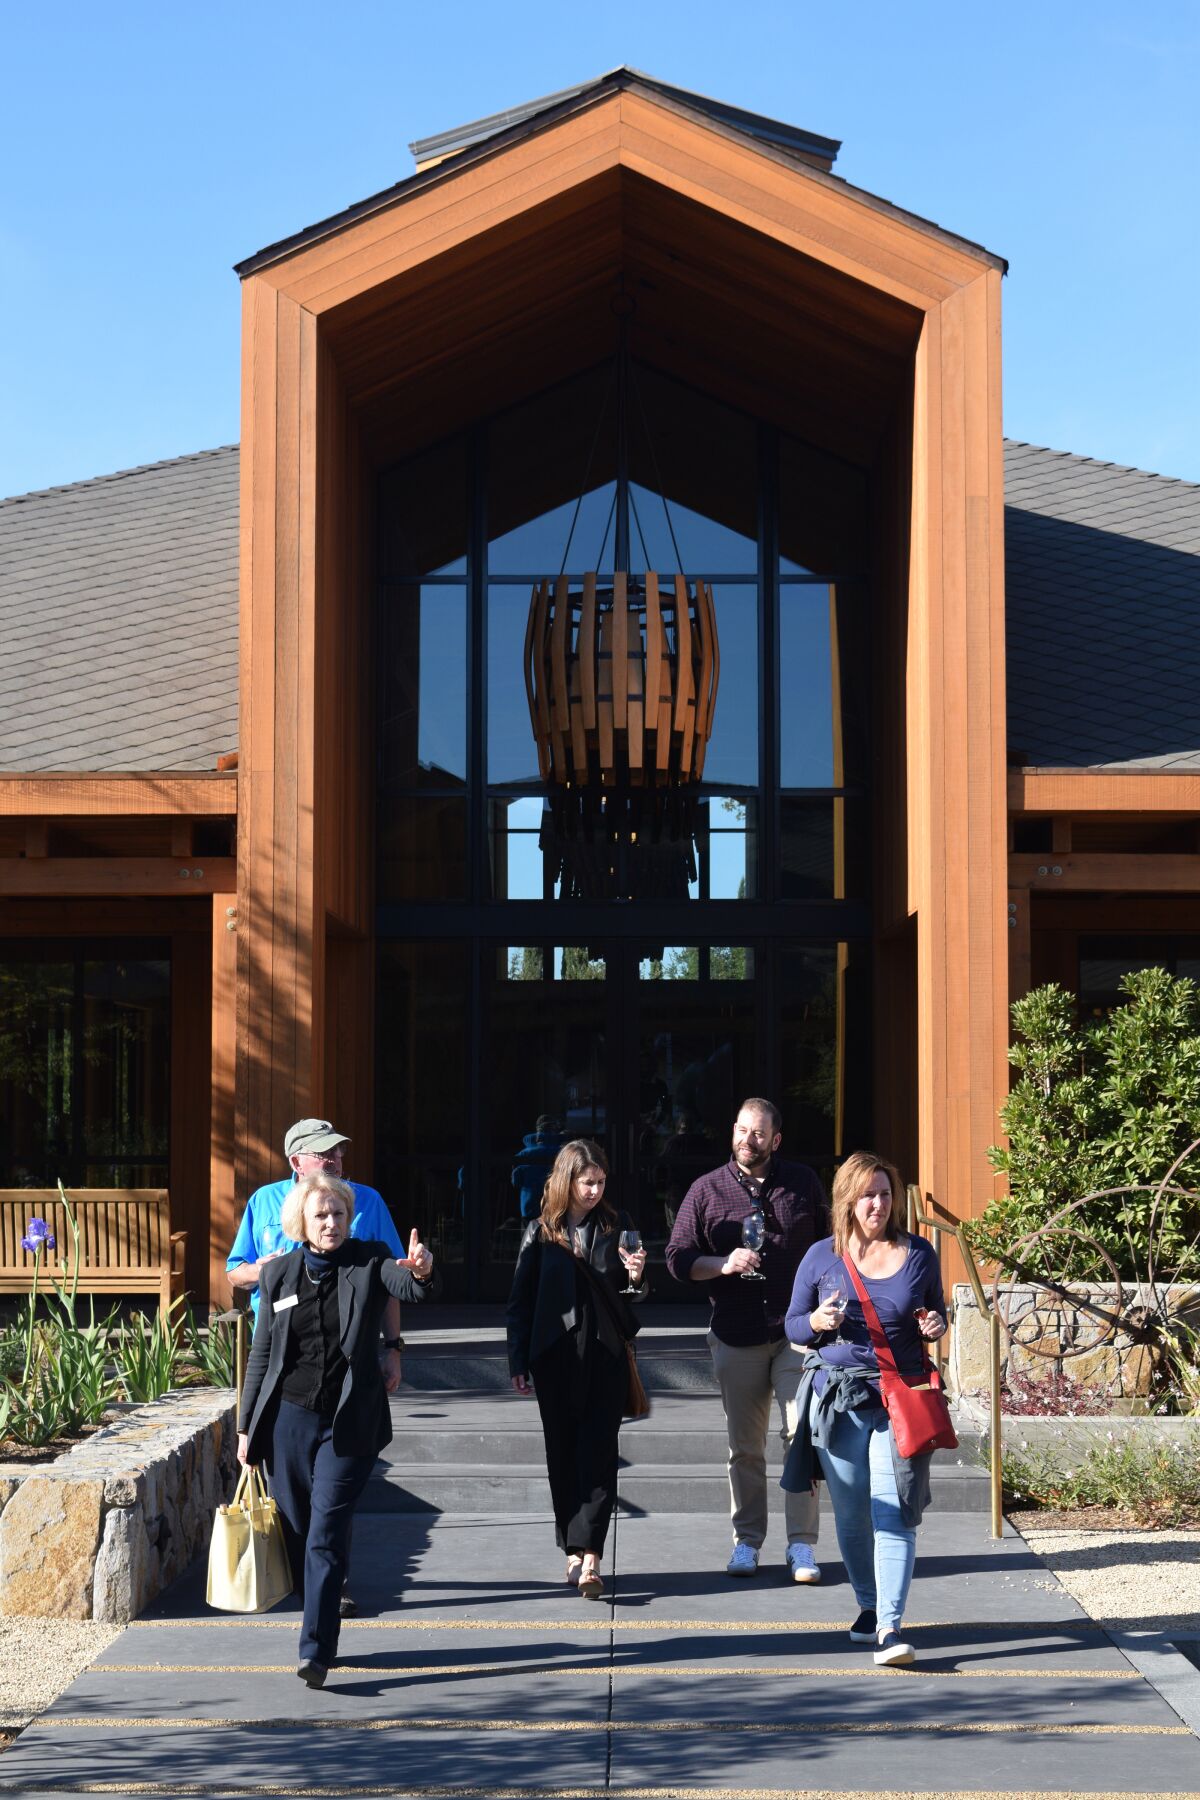 Cakebread Cellars in Rutherford, Calif., has an expansive new visitors center. Here, wine tasters head off on a tour of the facilities.